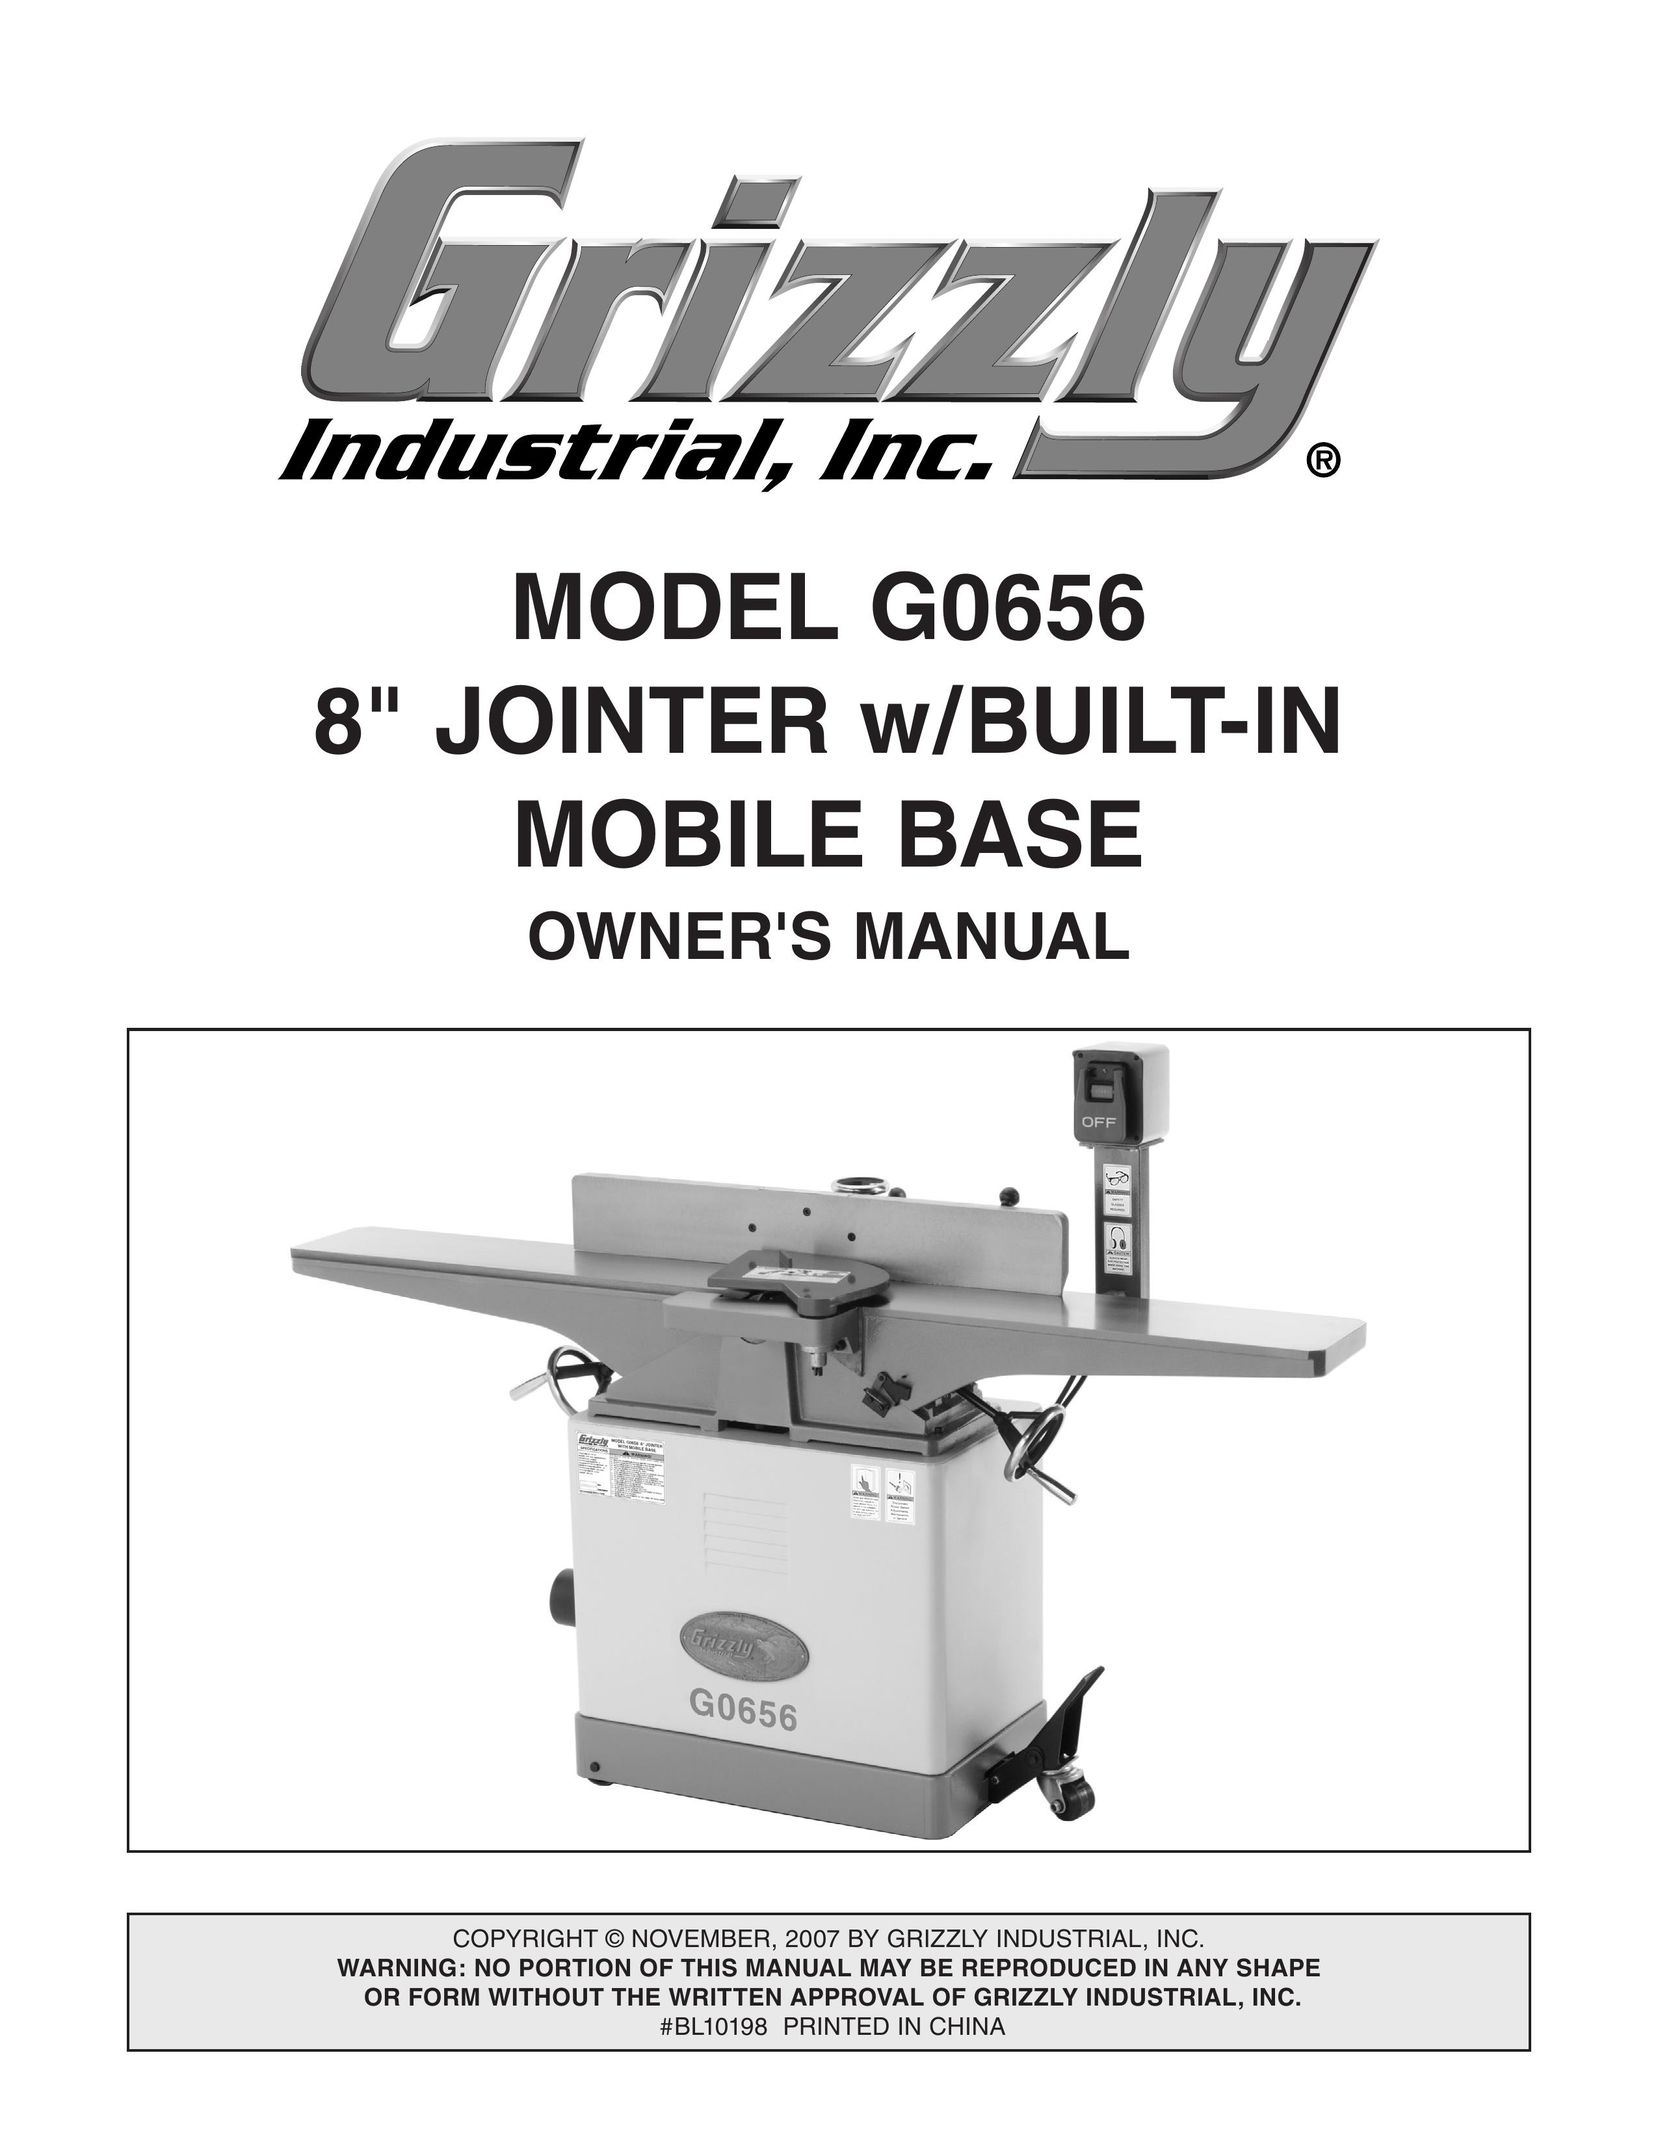 Grizzly G0656 Biscuit Joiner User Manual (Page 1)